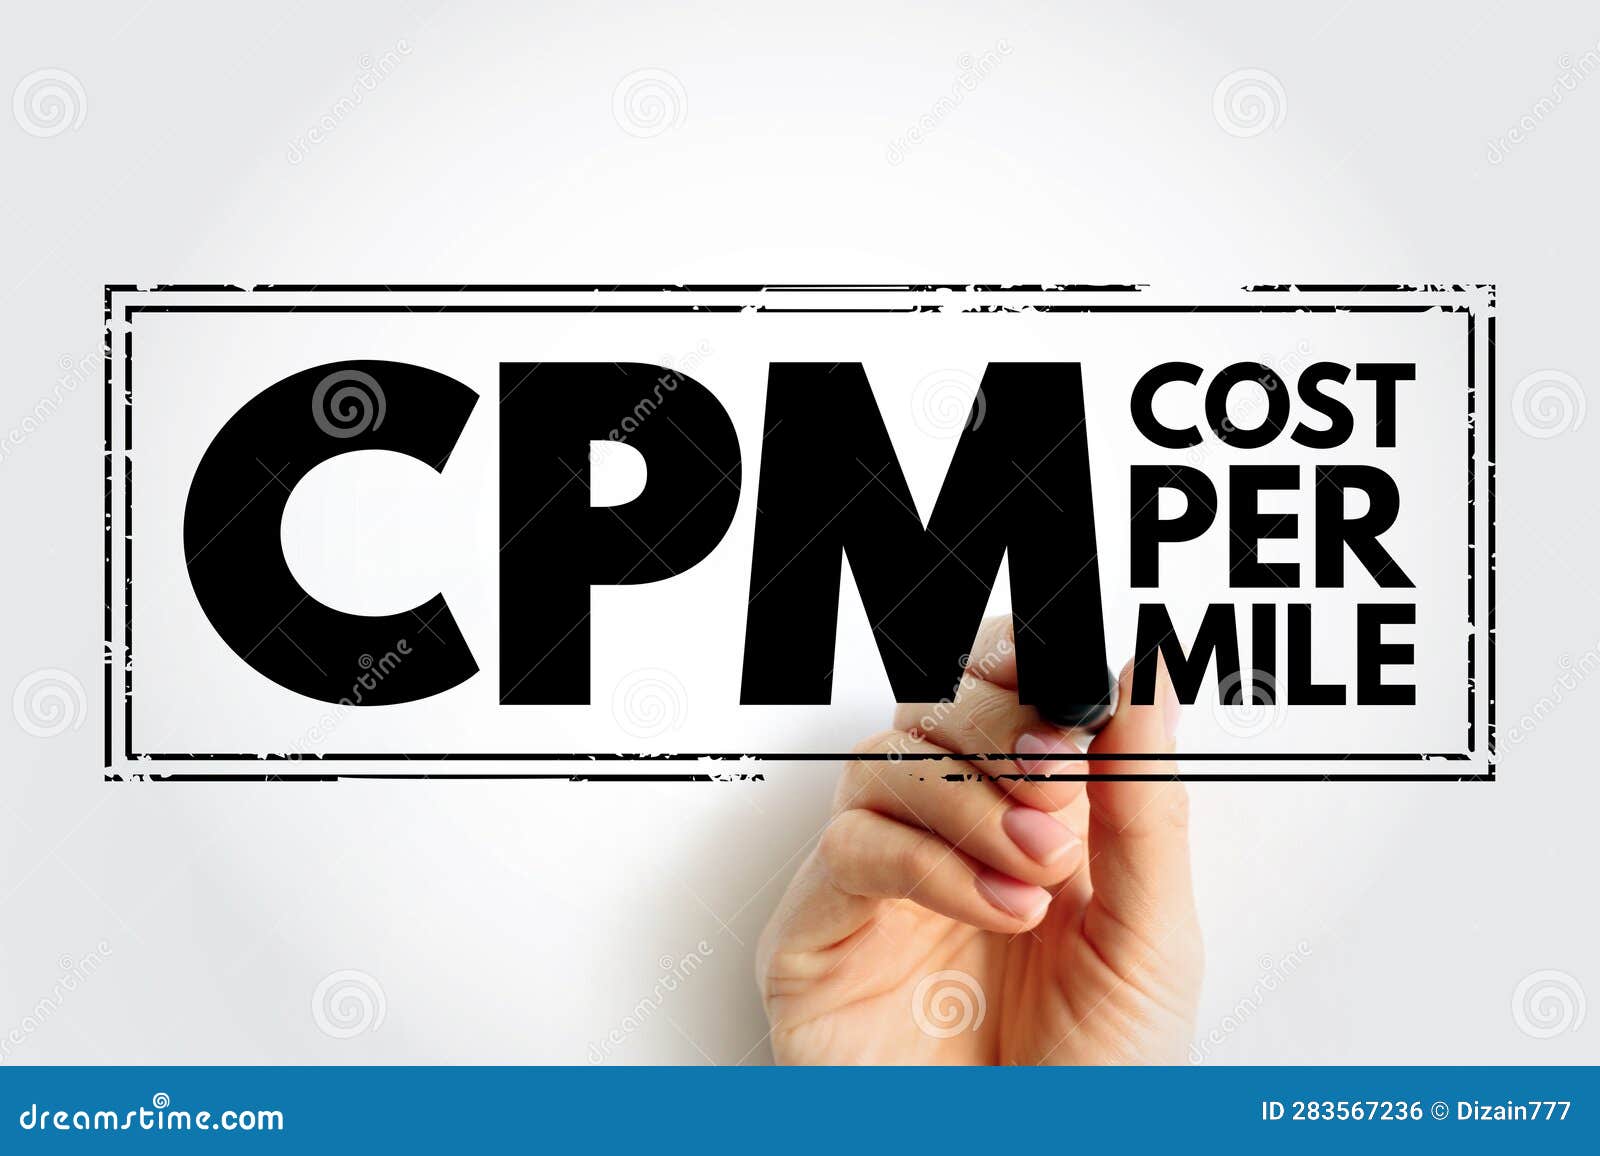 cpm cost per mile - used measurement in advertising, it is the cost an advertiser pays for one thousand views or impressions of an